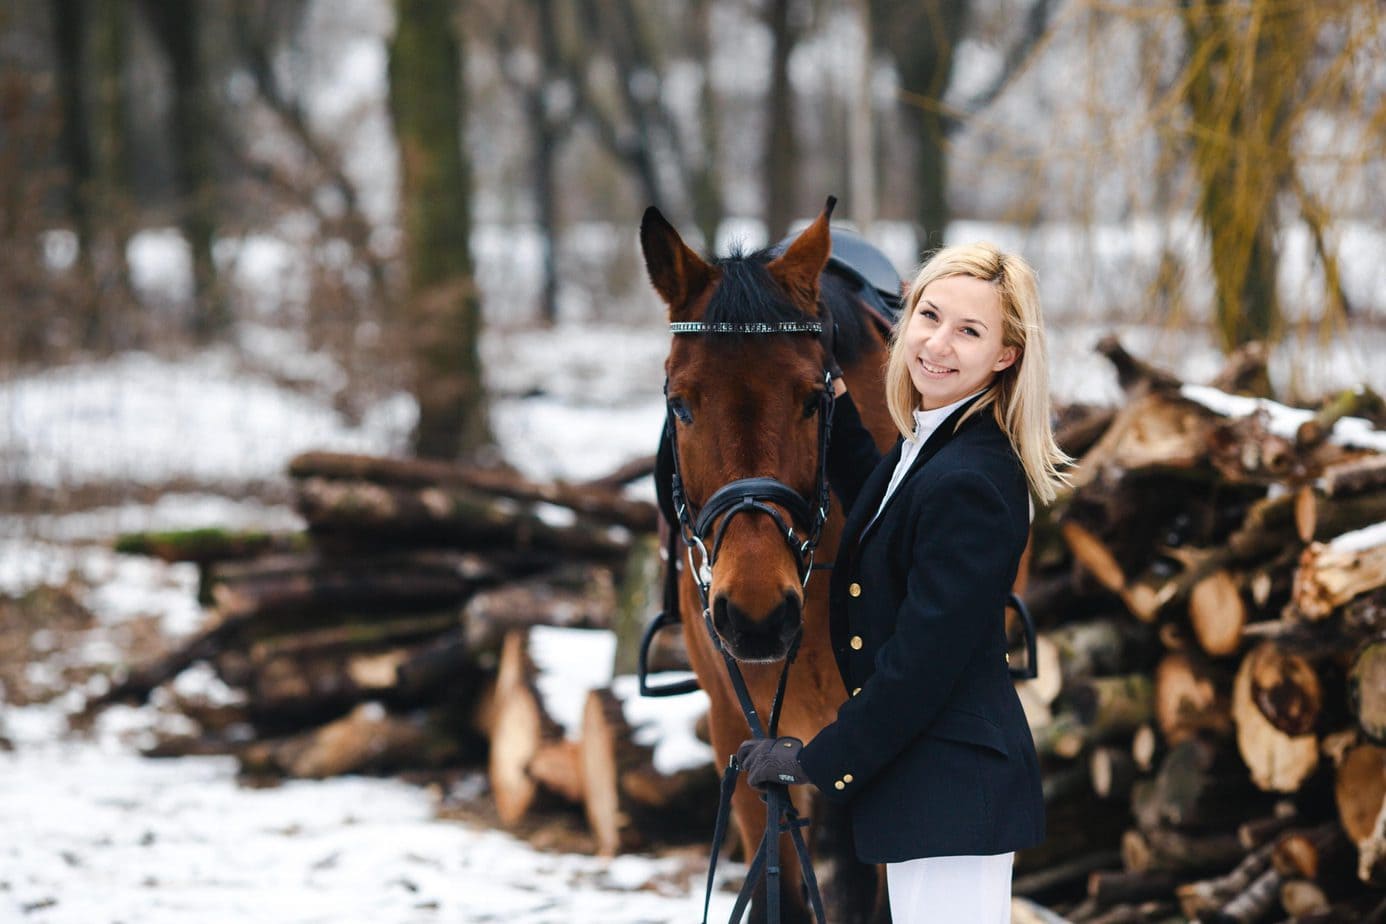 Winter horseback riding – what to keep in mind before heading outdoors?